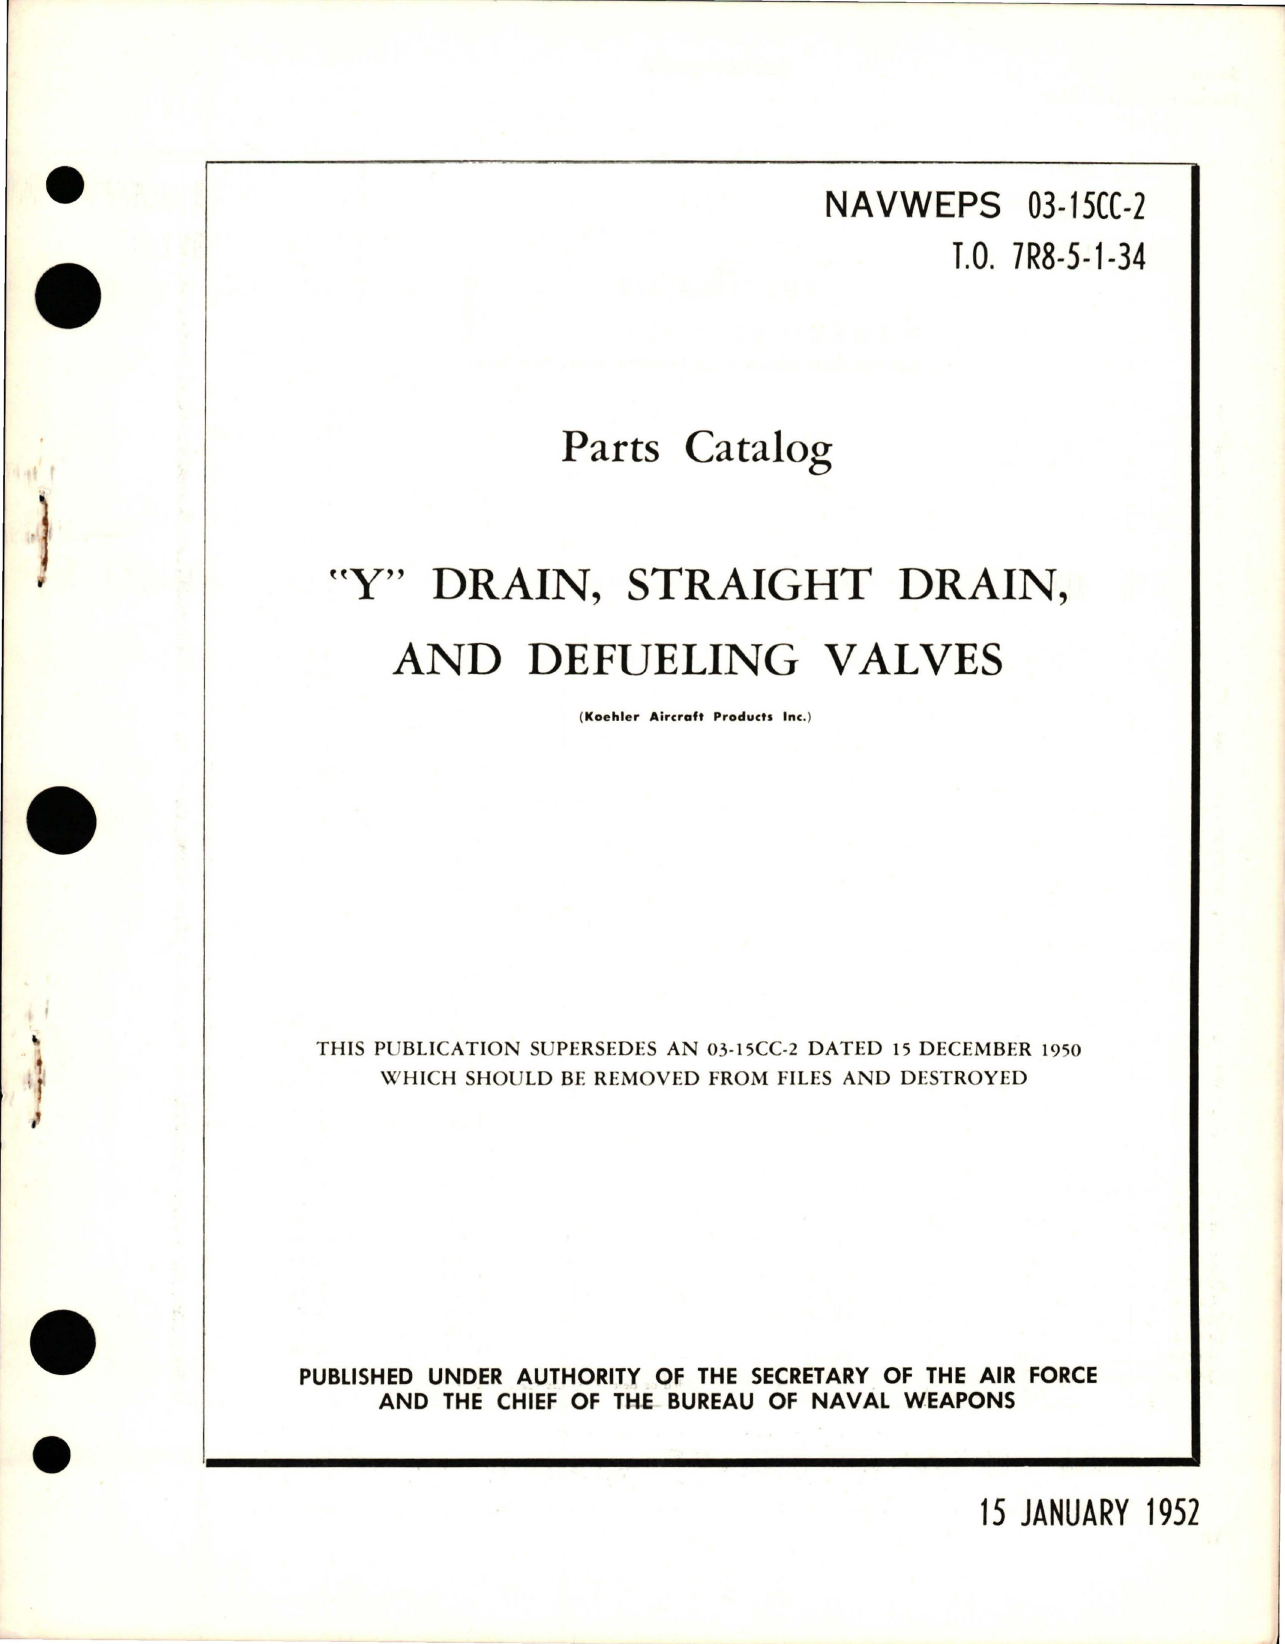 Sample page 1 from AirCorps Library document: Parts Catalog for Y Drain, Straight Drain and Defueling Valves